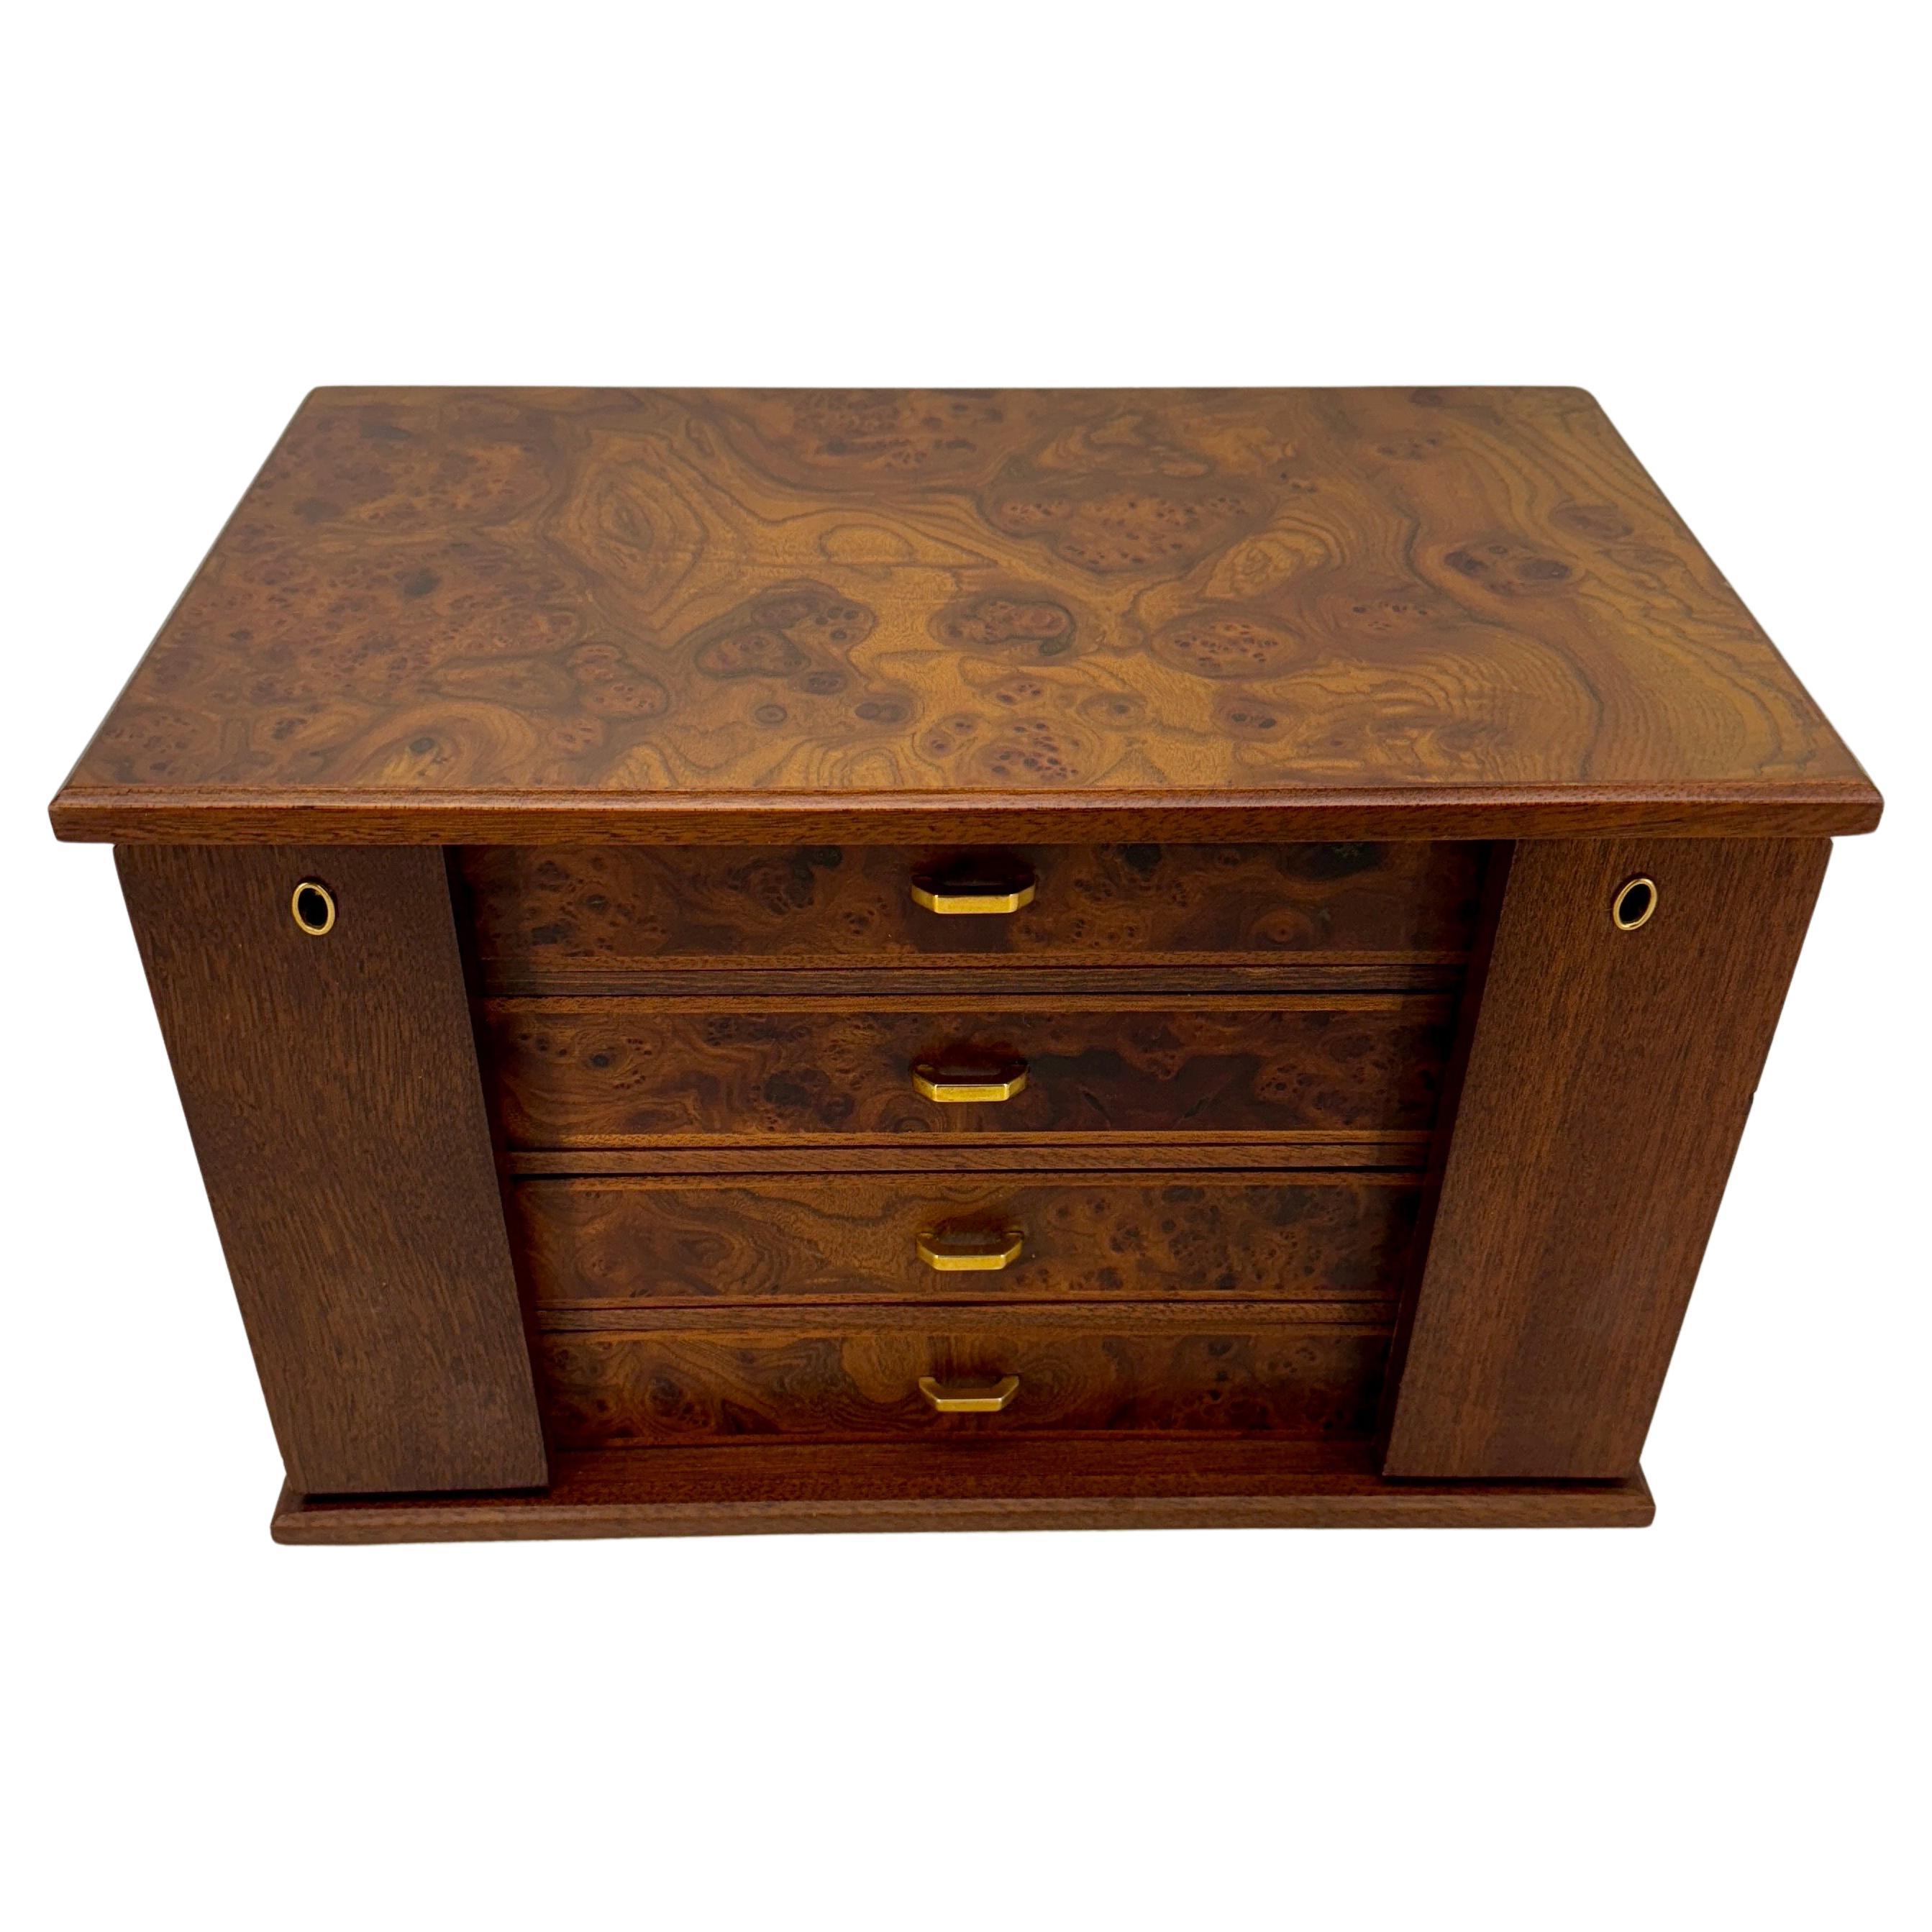 Mid-20th Century Large Italian Rectangular Burl Wood Jewelry Box With 4 Drawers For Sale